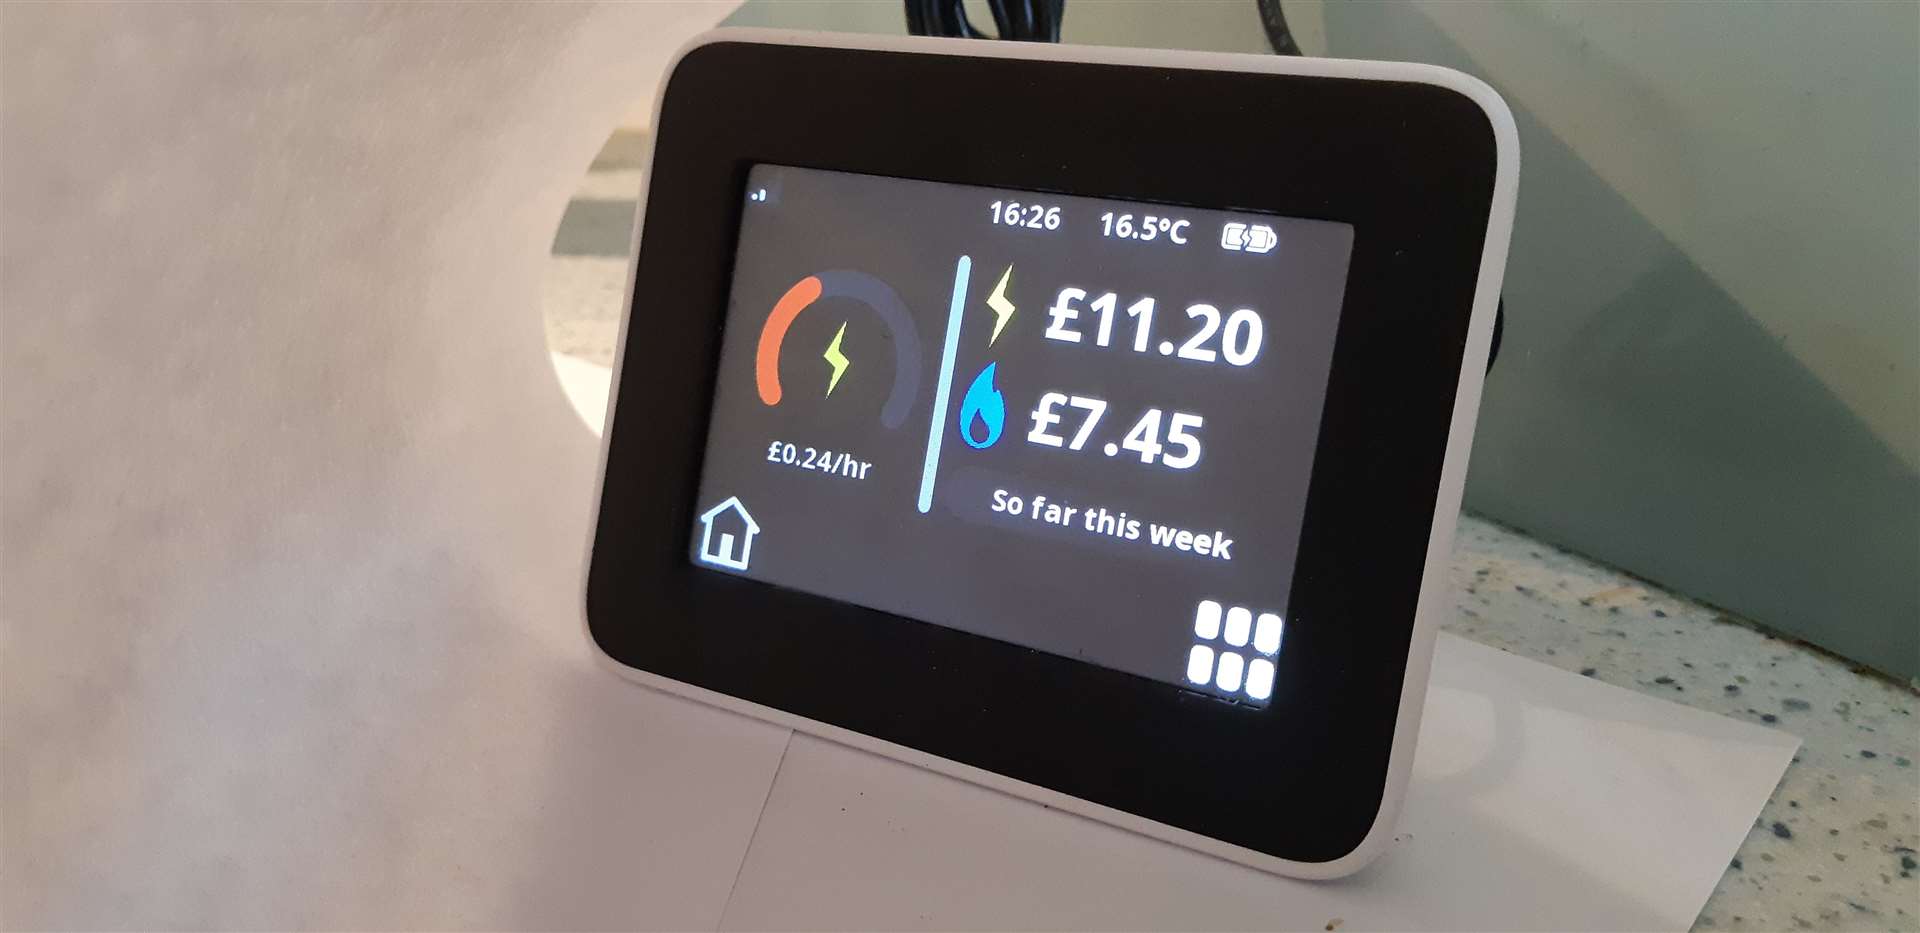 Homes with a smart meter won't need to take a reading id data is being sent back to suppliers